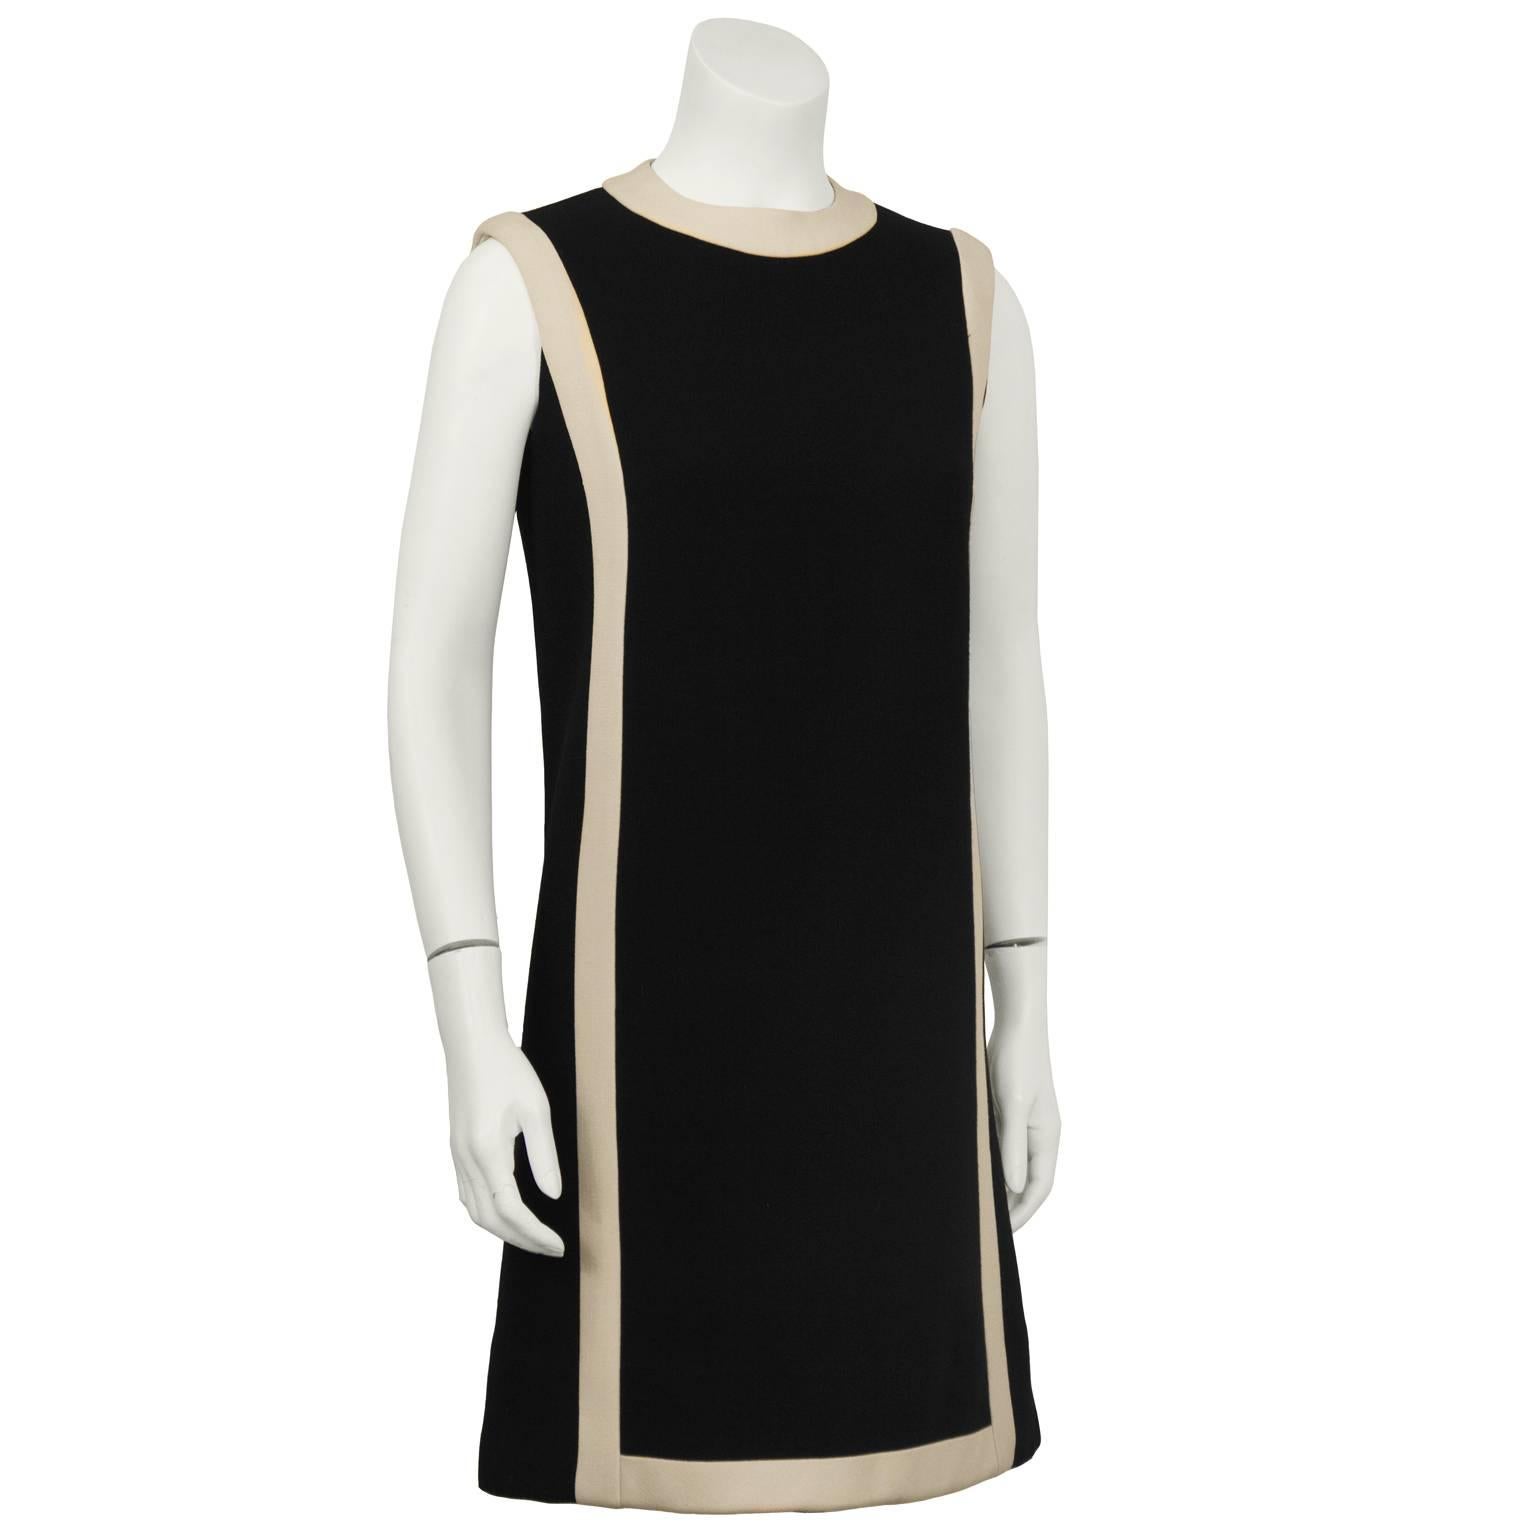 Anonymous Mod geometric black wool sleeveless shift dress. Dress features a cream band detail along the neckline and two bands which travel around the shoulder and down the front and back. Zipper at the back. Invisible repair on the front. Excellent